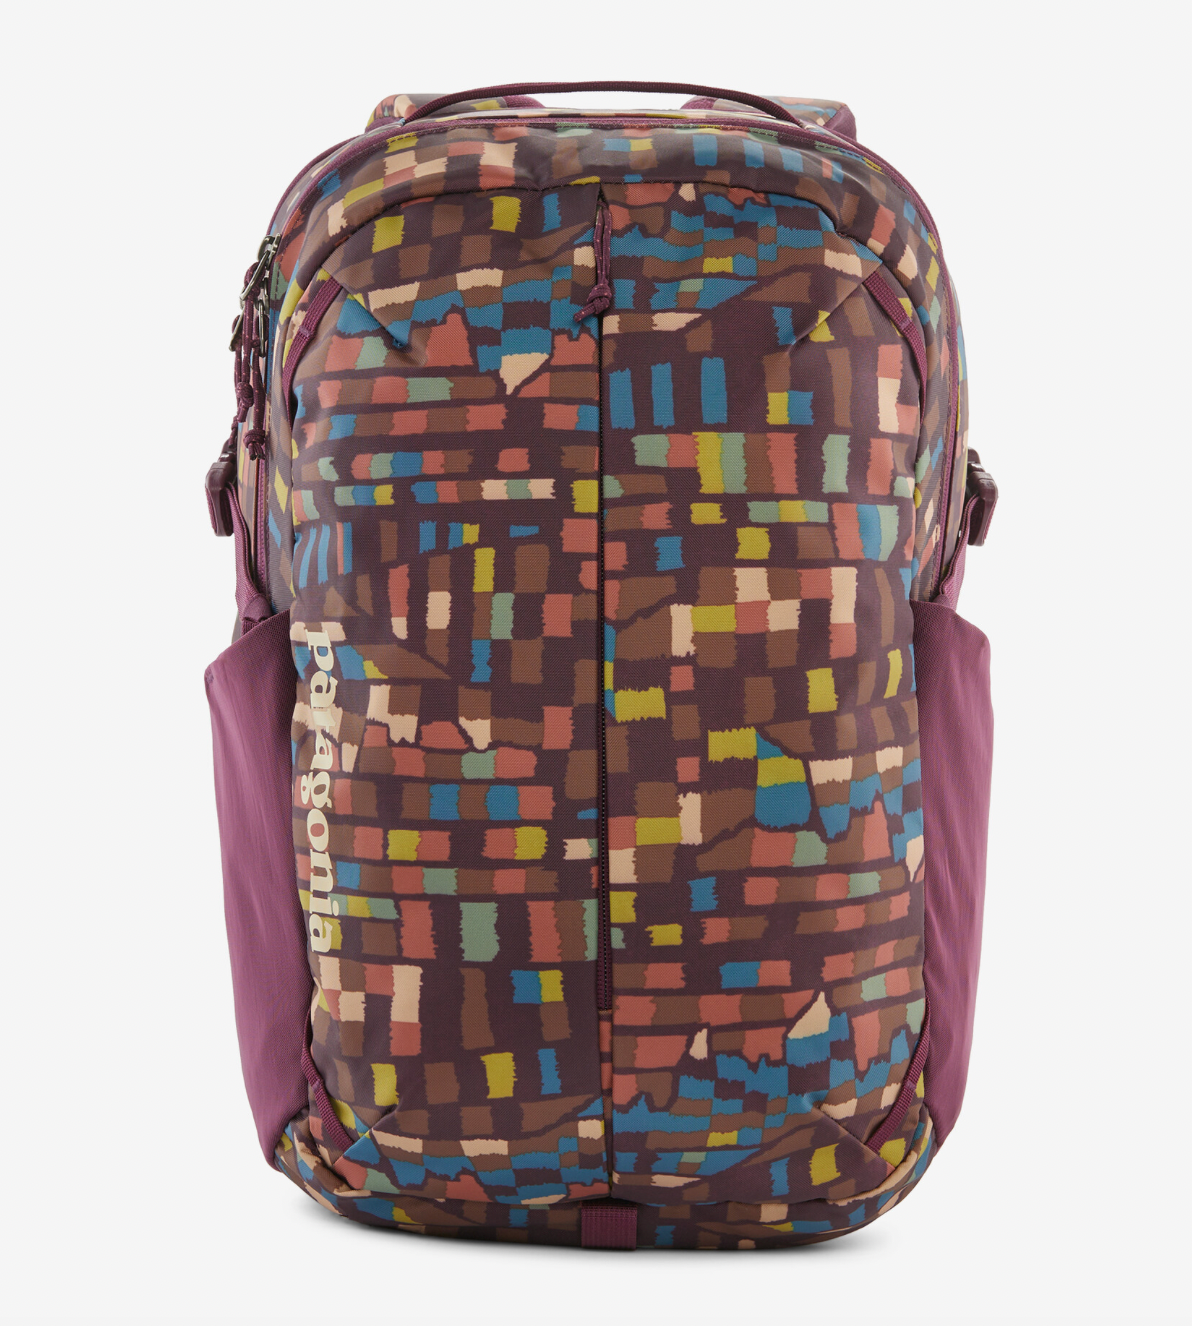 PATAGONIA REFUGIO DAY PACK 26L